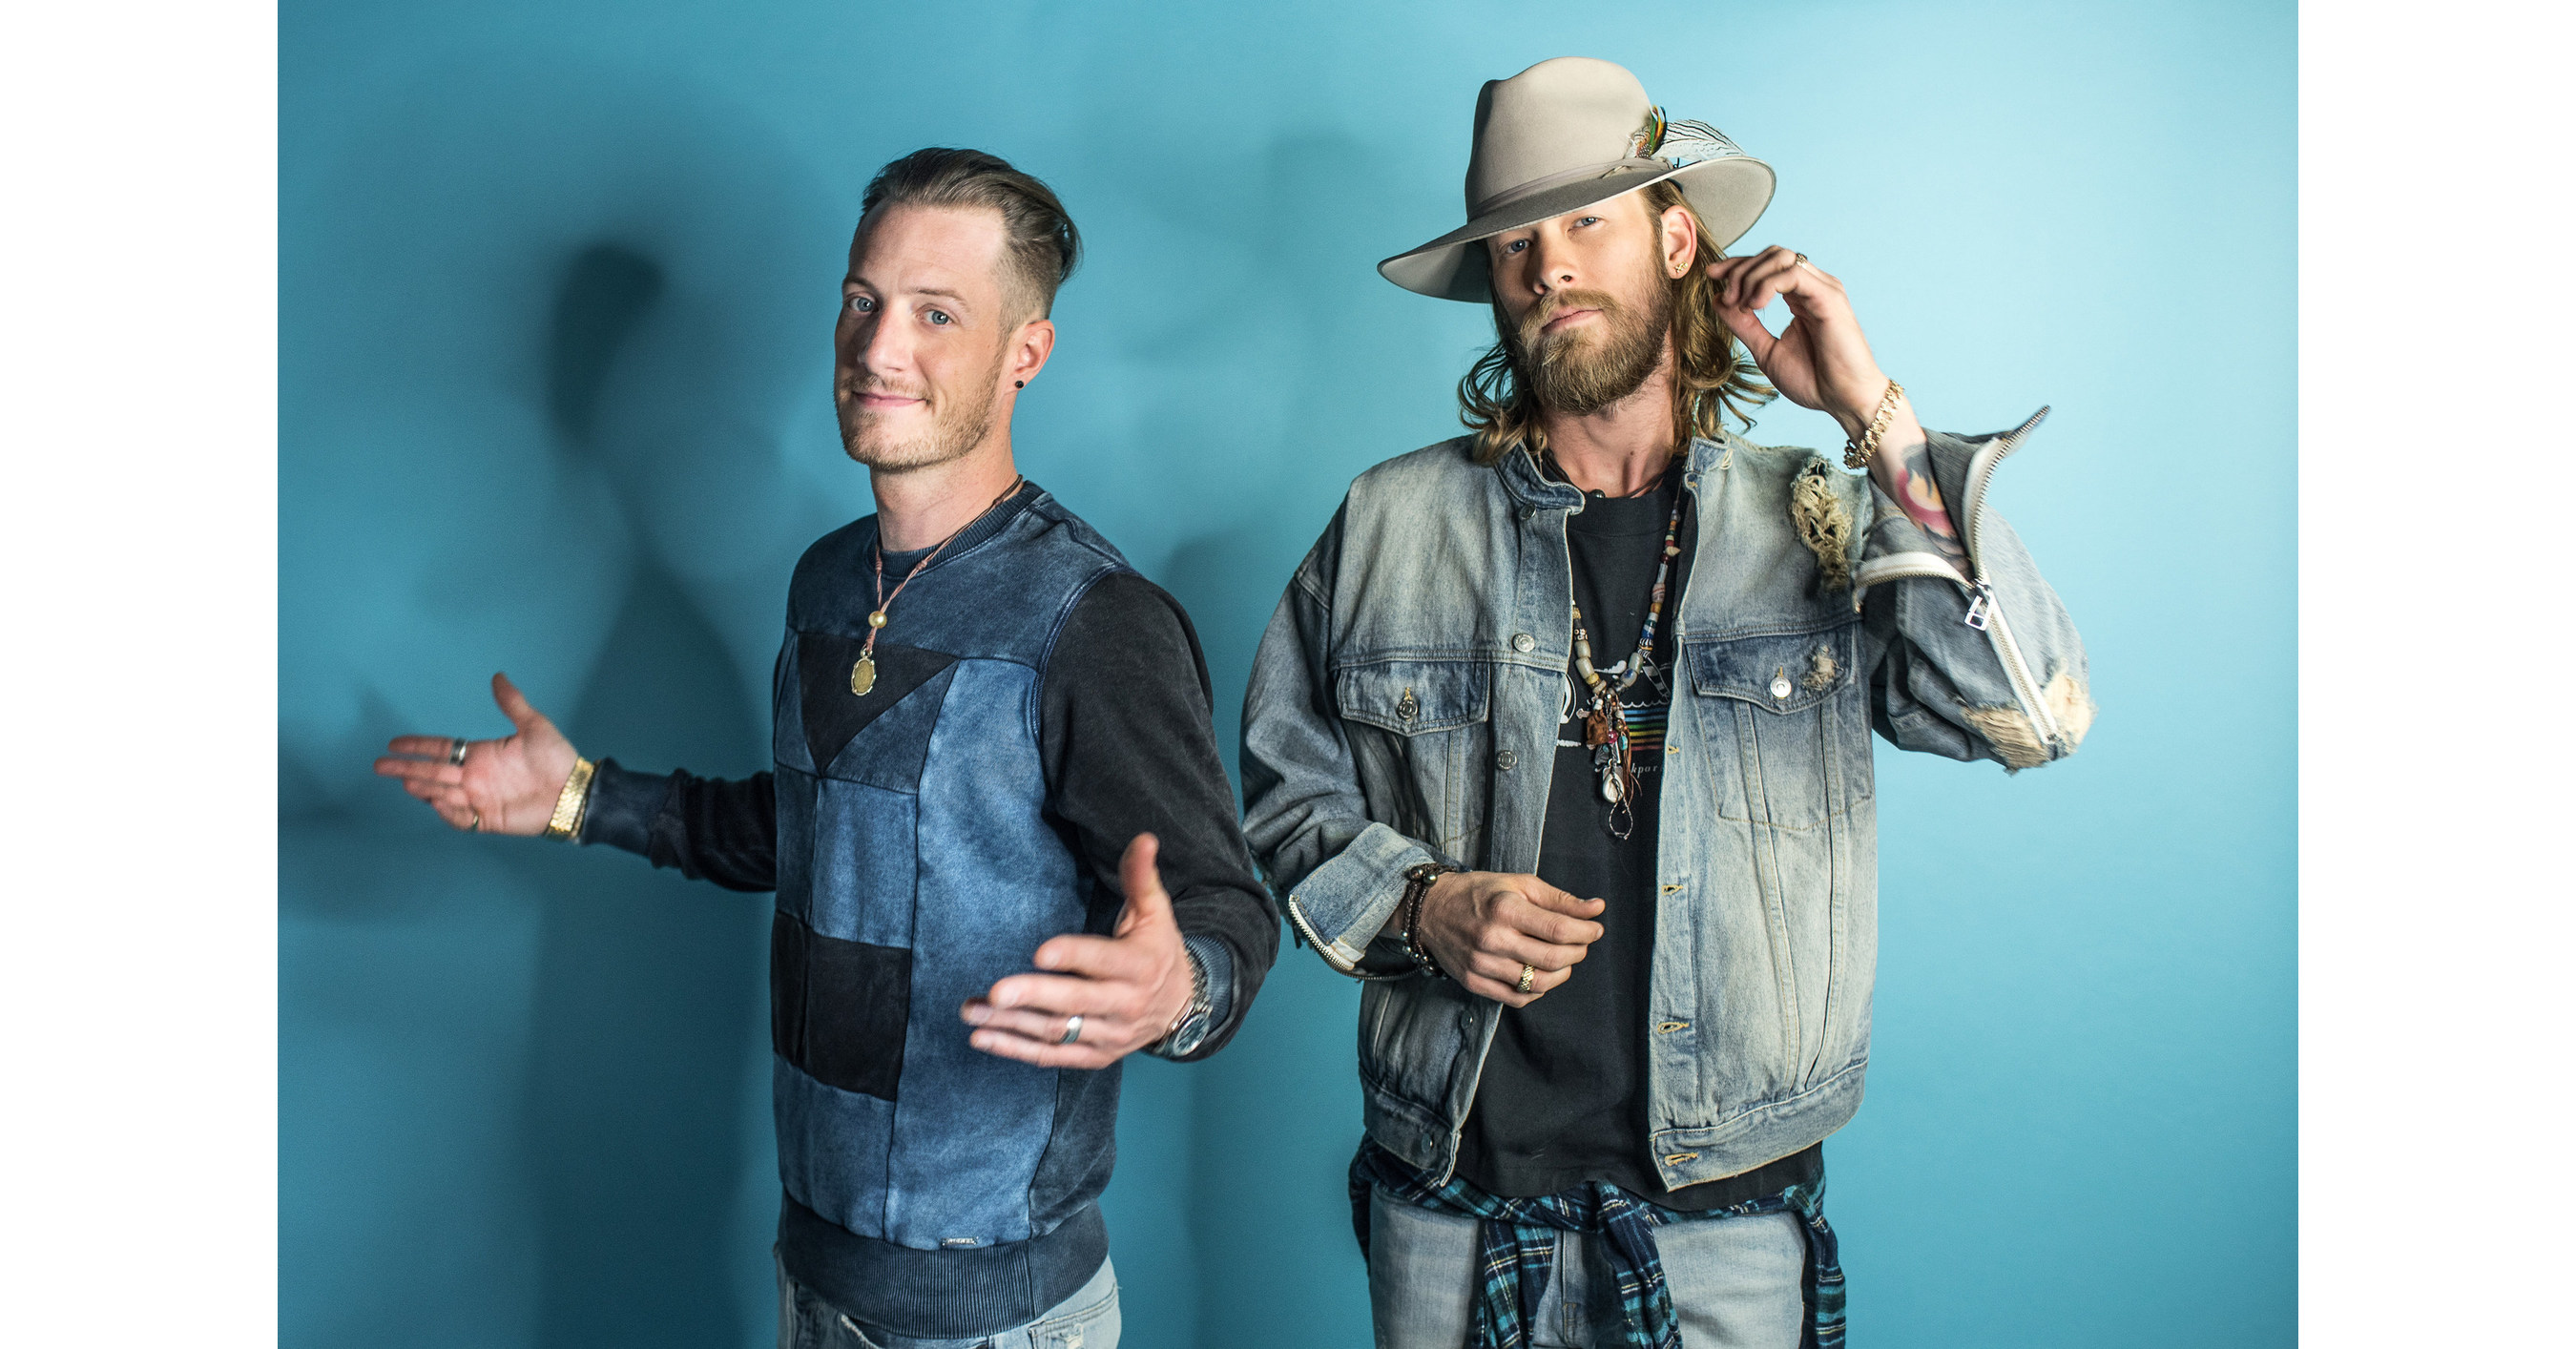 Florida Georgia Line Set Grand Opening Of FGL HOUSE For June 5 - PR Newswire (press release)